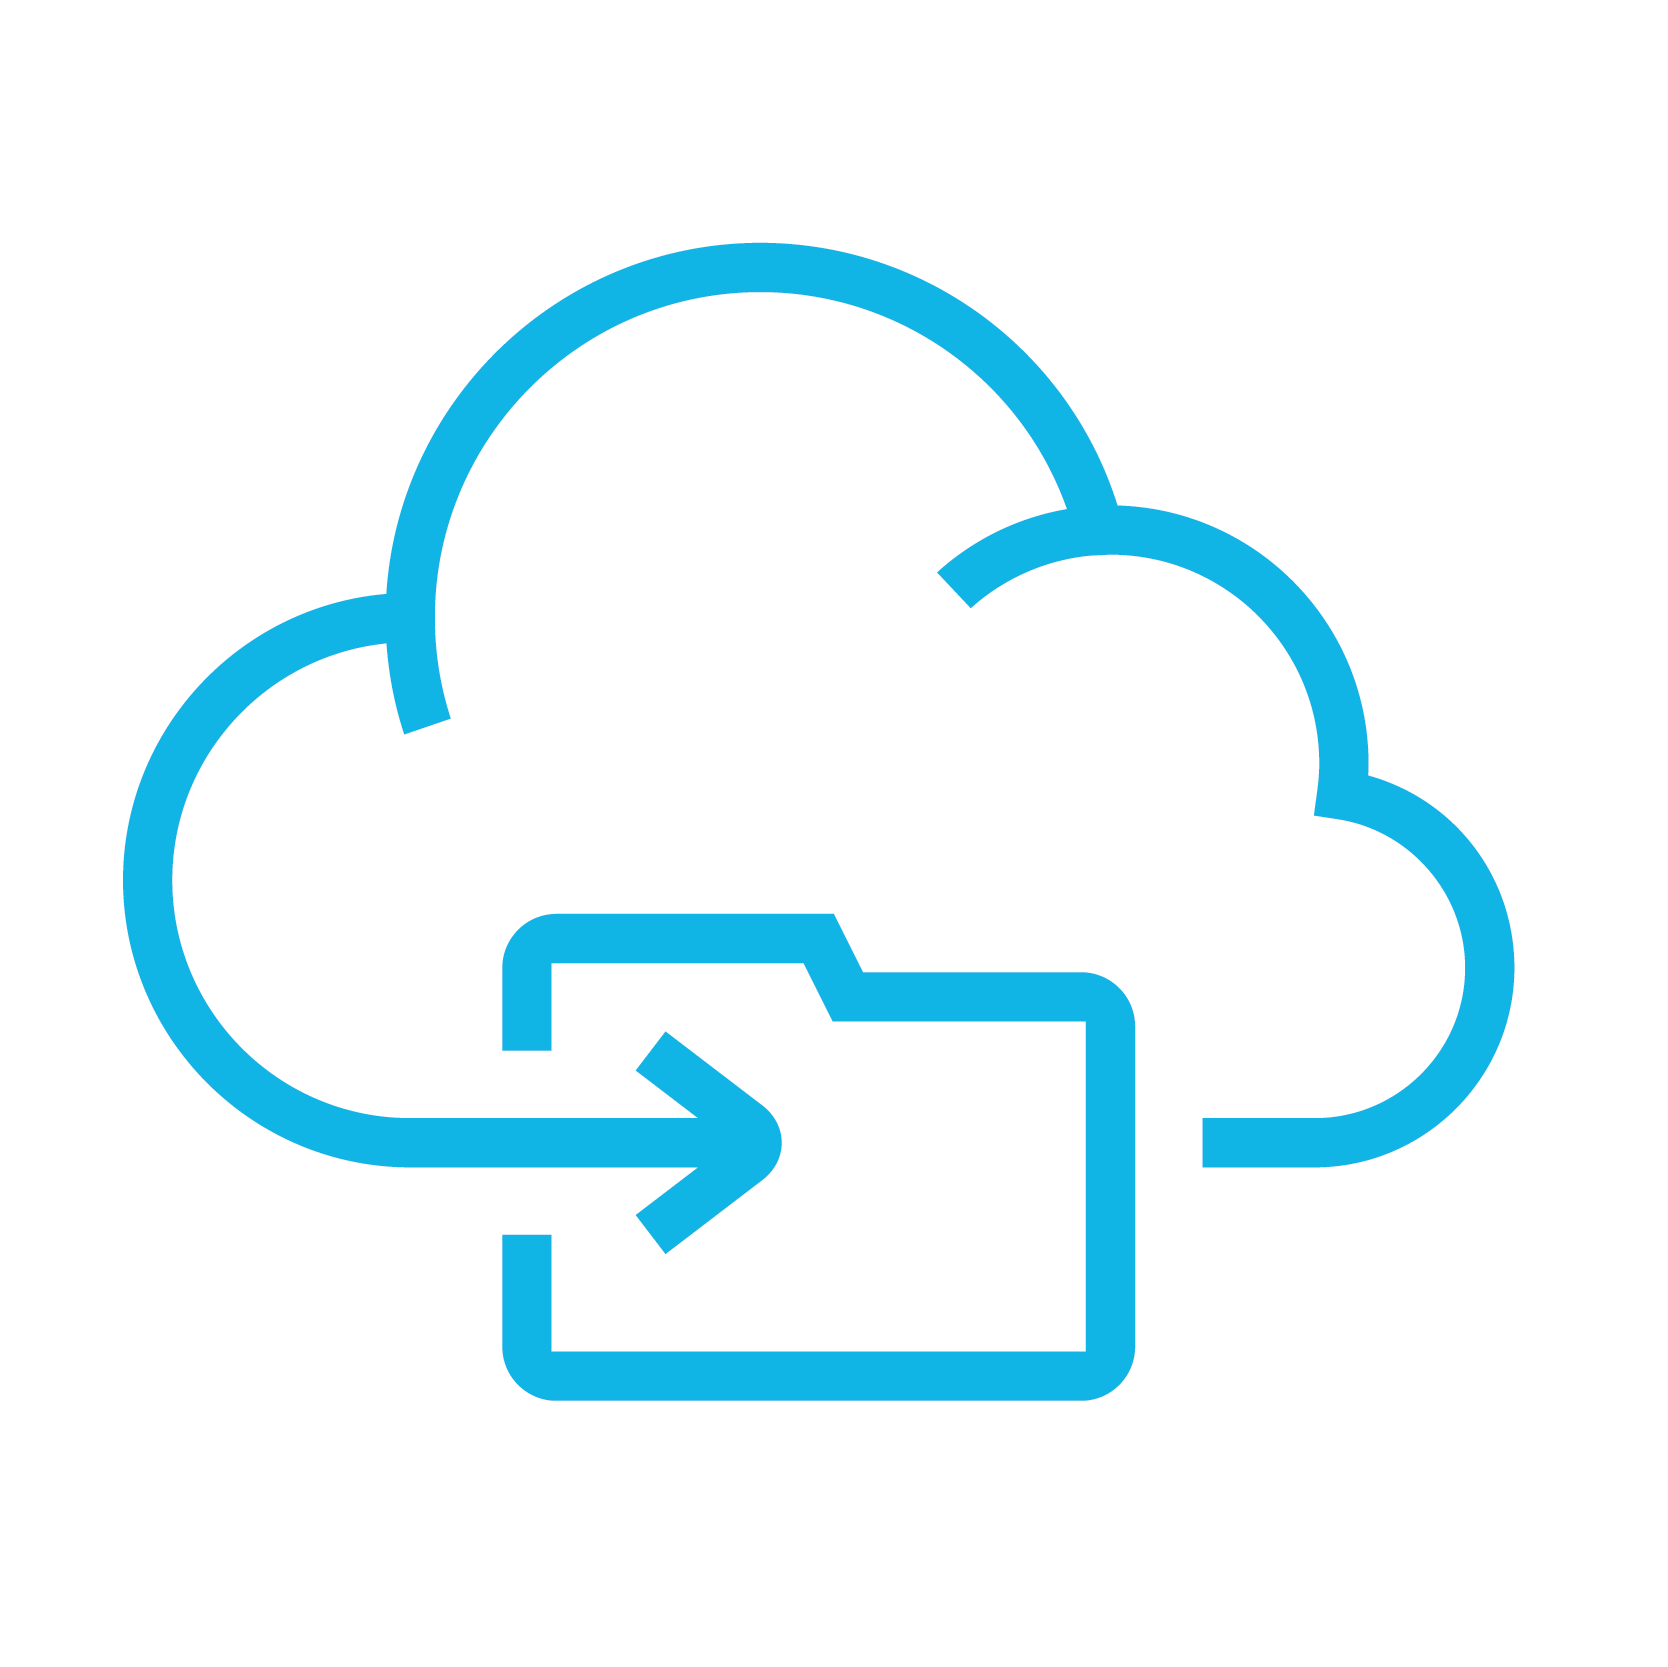 An icon of a cloud wrapped around a file folder.  This represents the fact that you have access to your data anywhere and at any time when you use HammerTech's platform.  